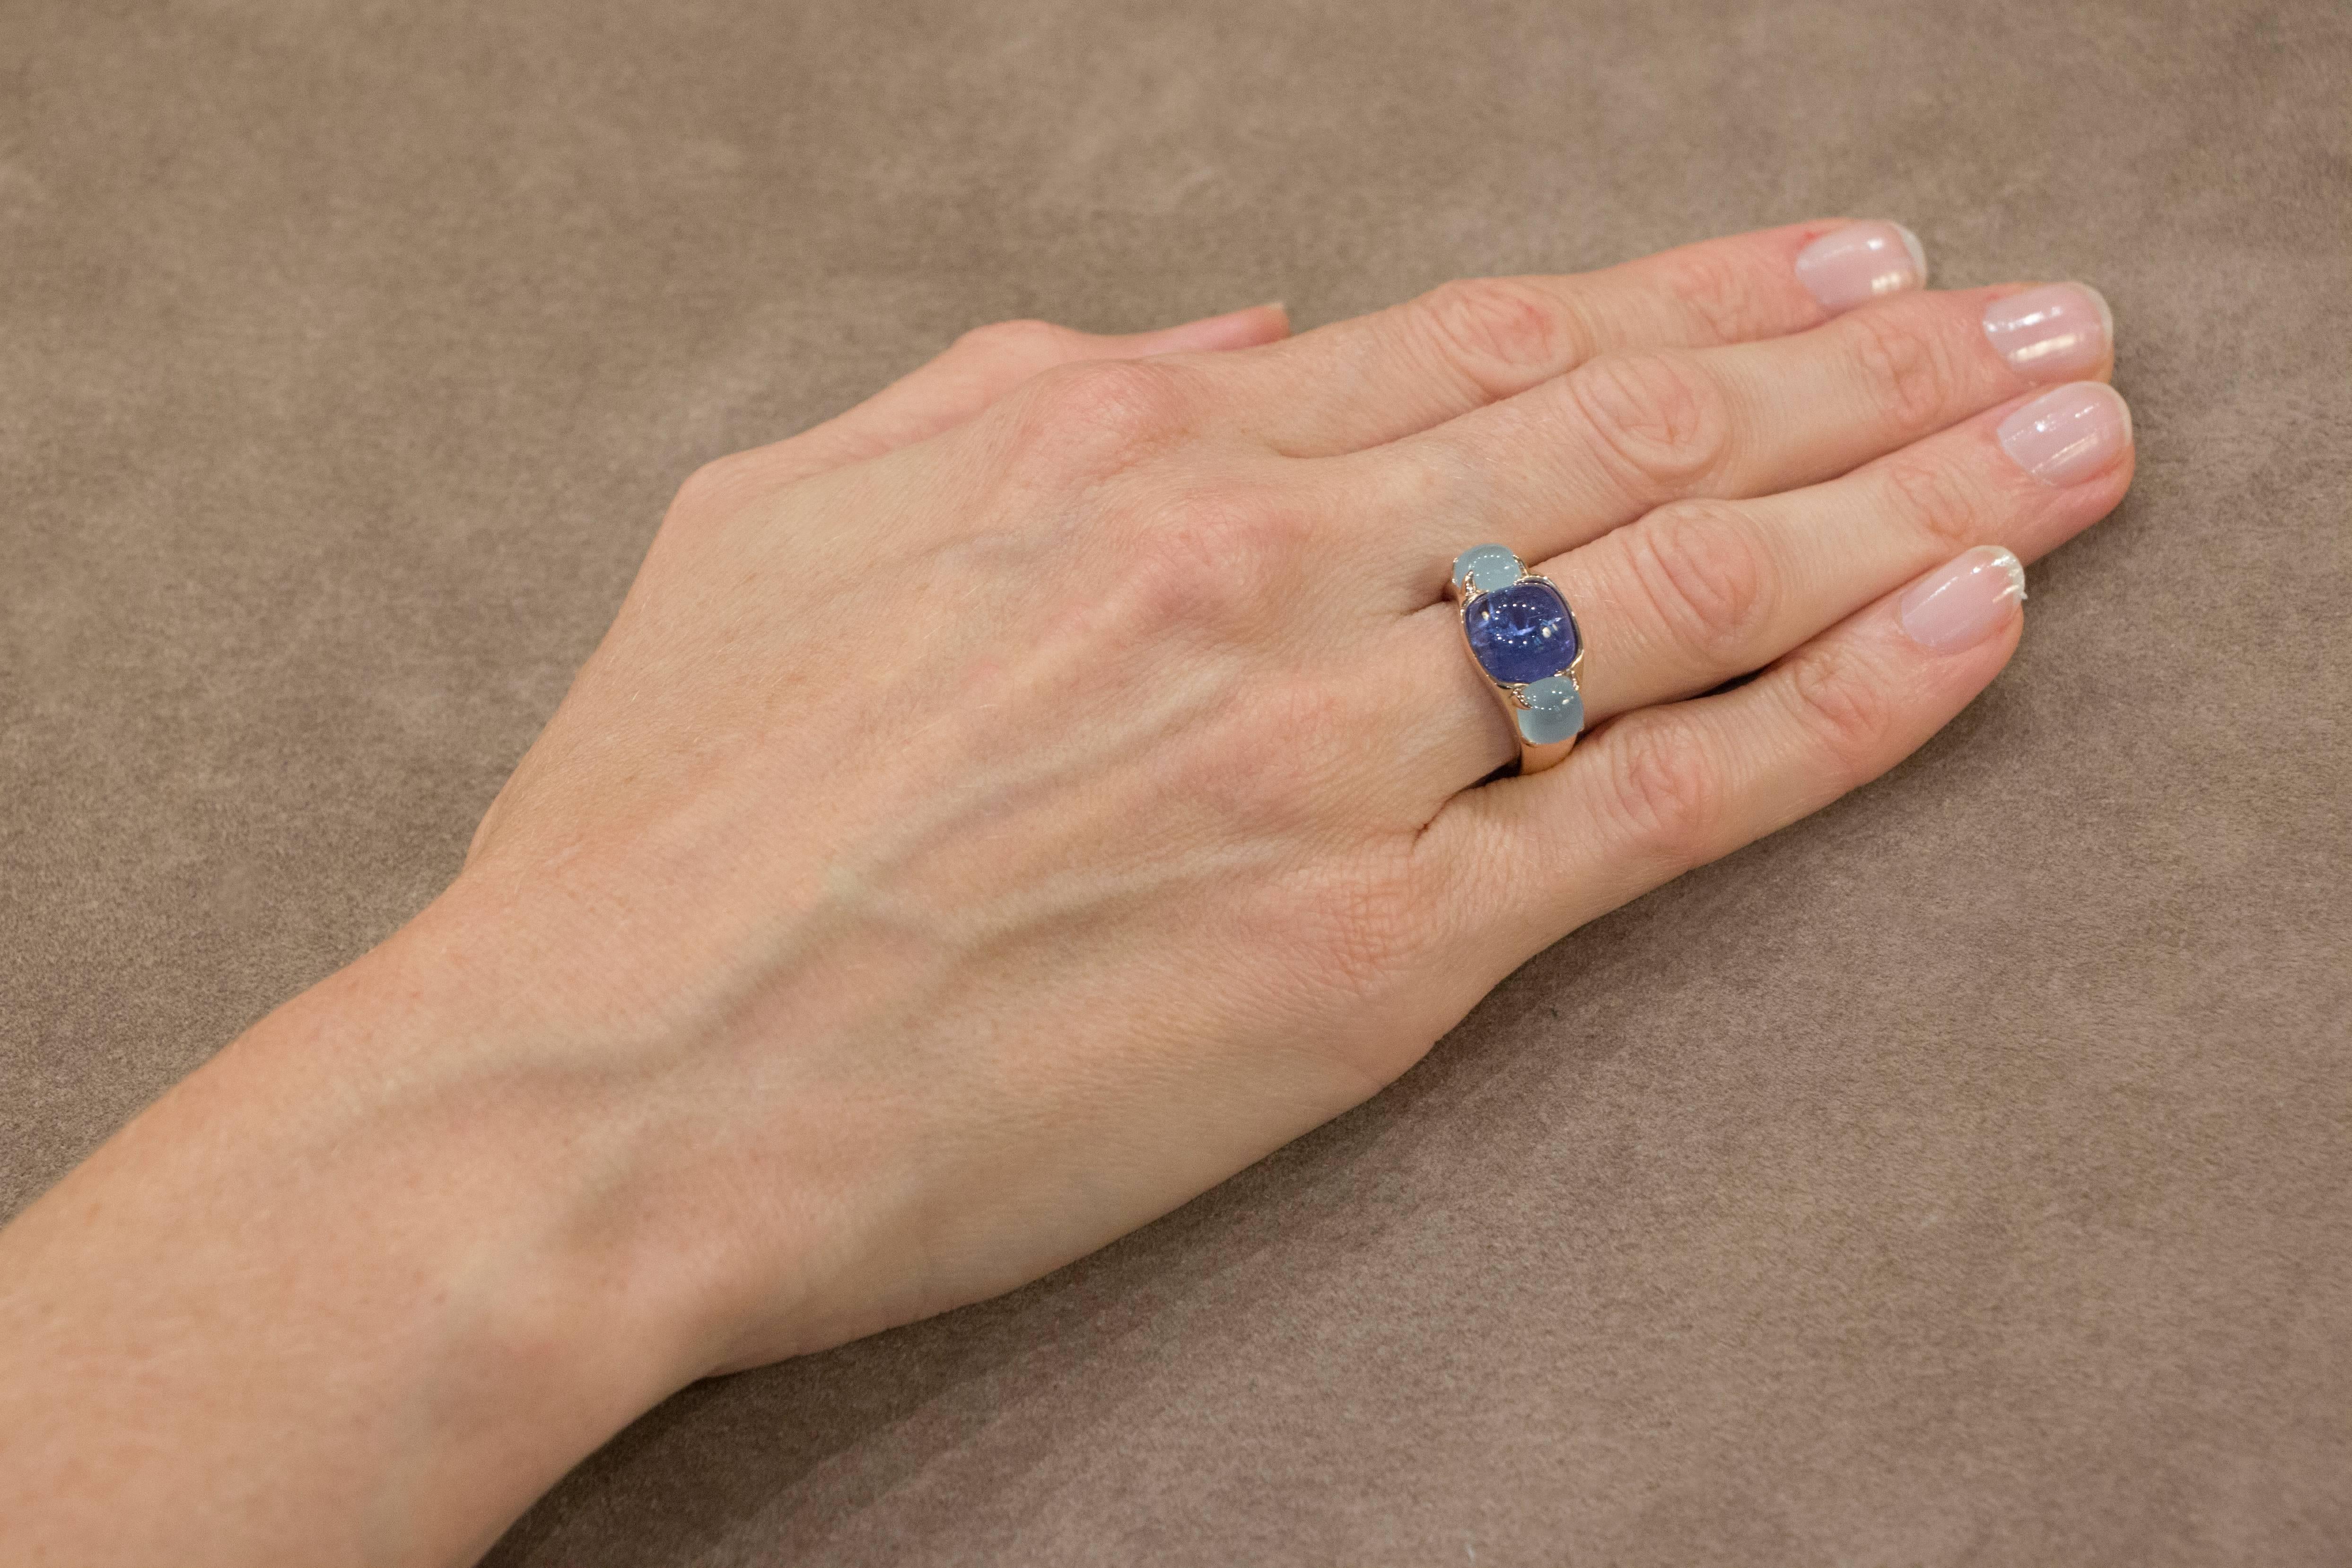 Jona design collection, hand crafted in Italy, 18 karat rose gold ring centering a cabochon Tanzanite weighing 5.80 carats, enhanced by two square cut aquamarines 1,43 carat each.Ring size US. 6.5, can be sized to any specification. 